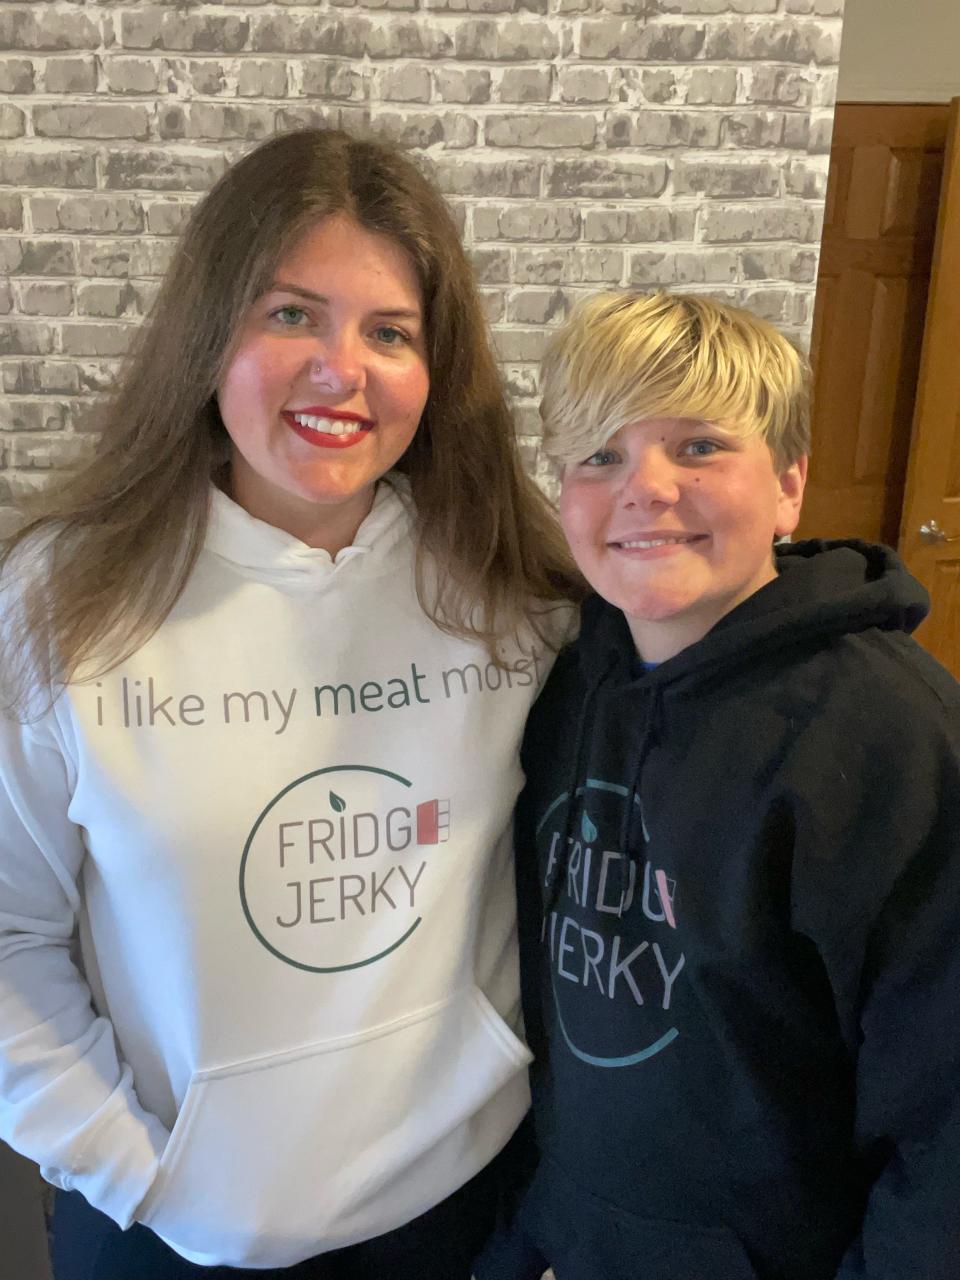 Kelly Schwartz, the owner of Fridge Jerky, poses with her son Ethan.